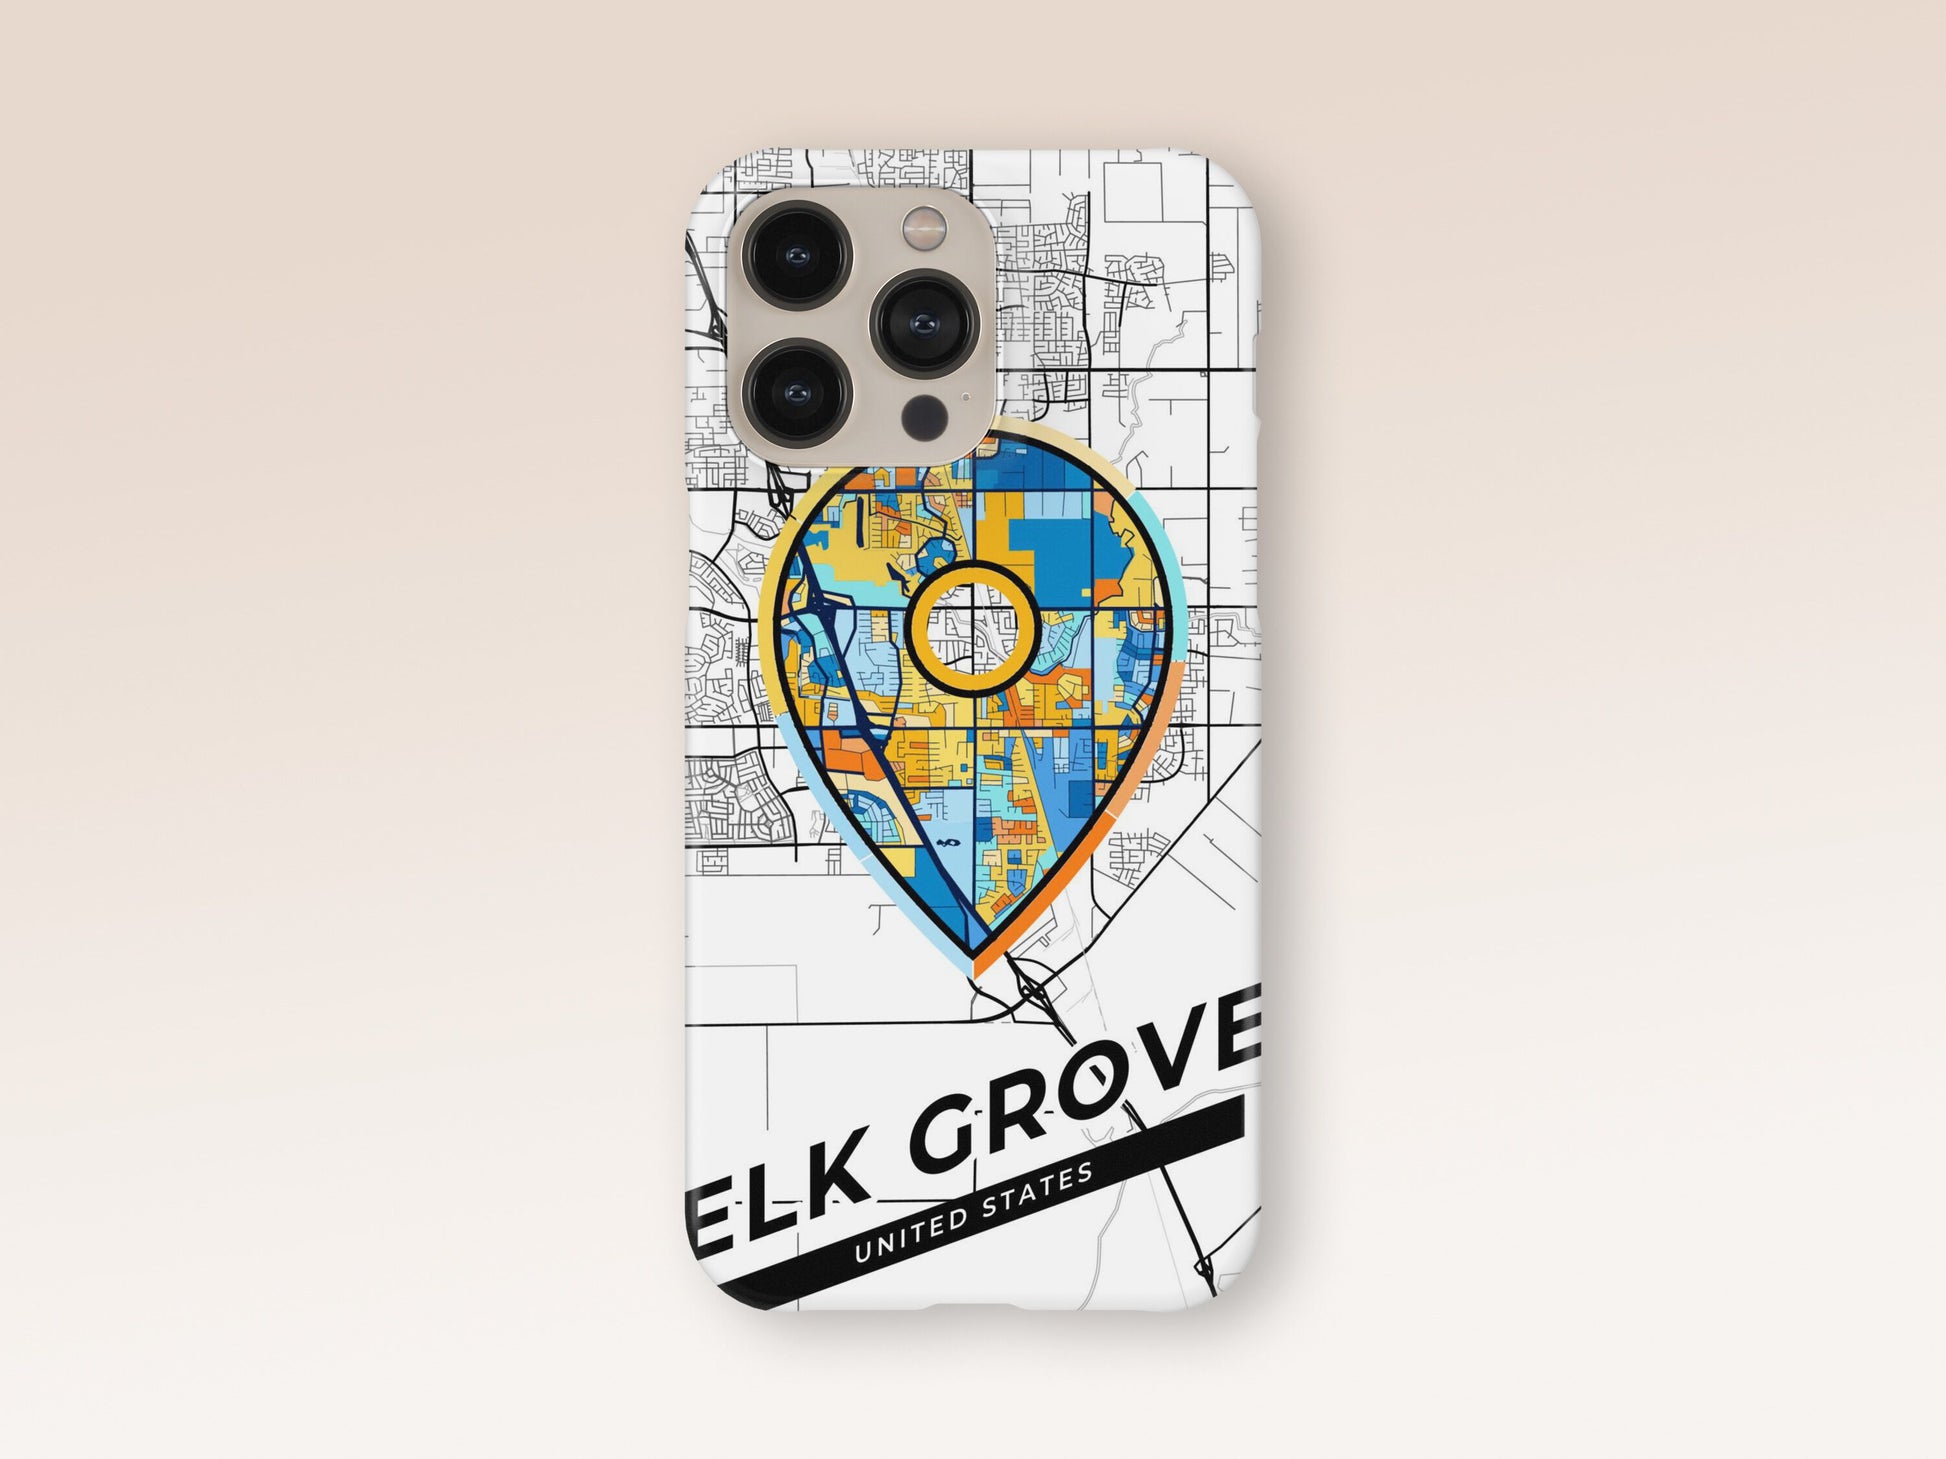 Elk Grove California slim phone case with colorful icon. Birthday, wedding or housewarming gift. Couple match cases. 1